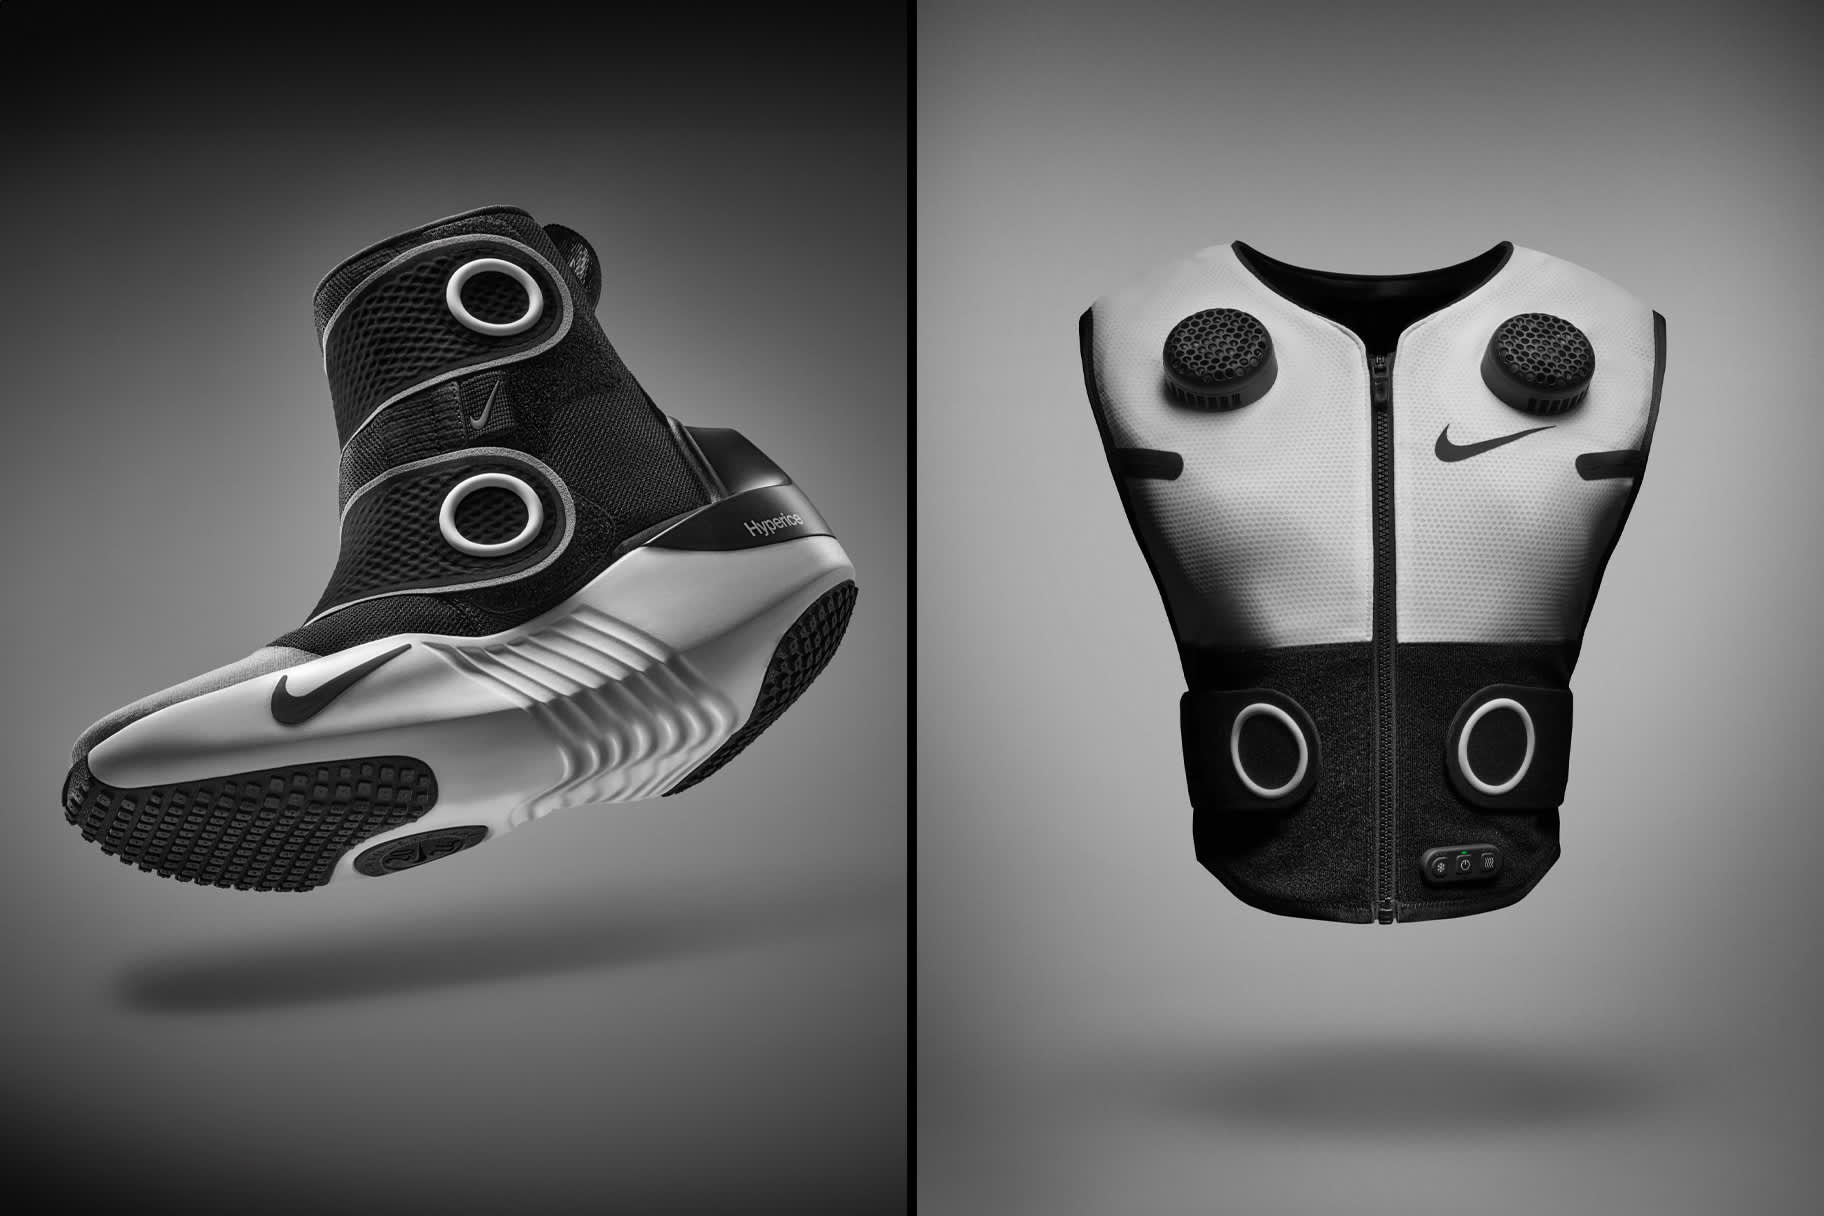 Nike and Hyperice unveil the ultimate wearable technology for athletes